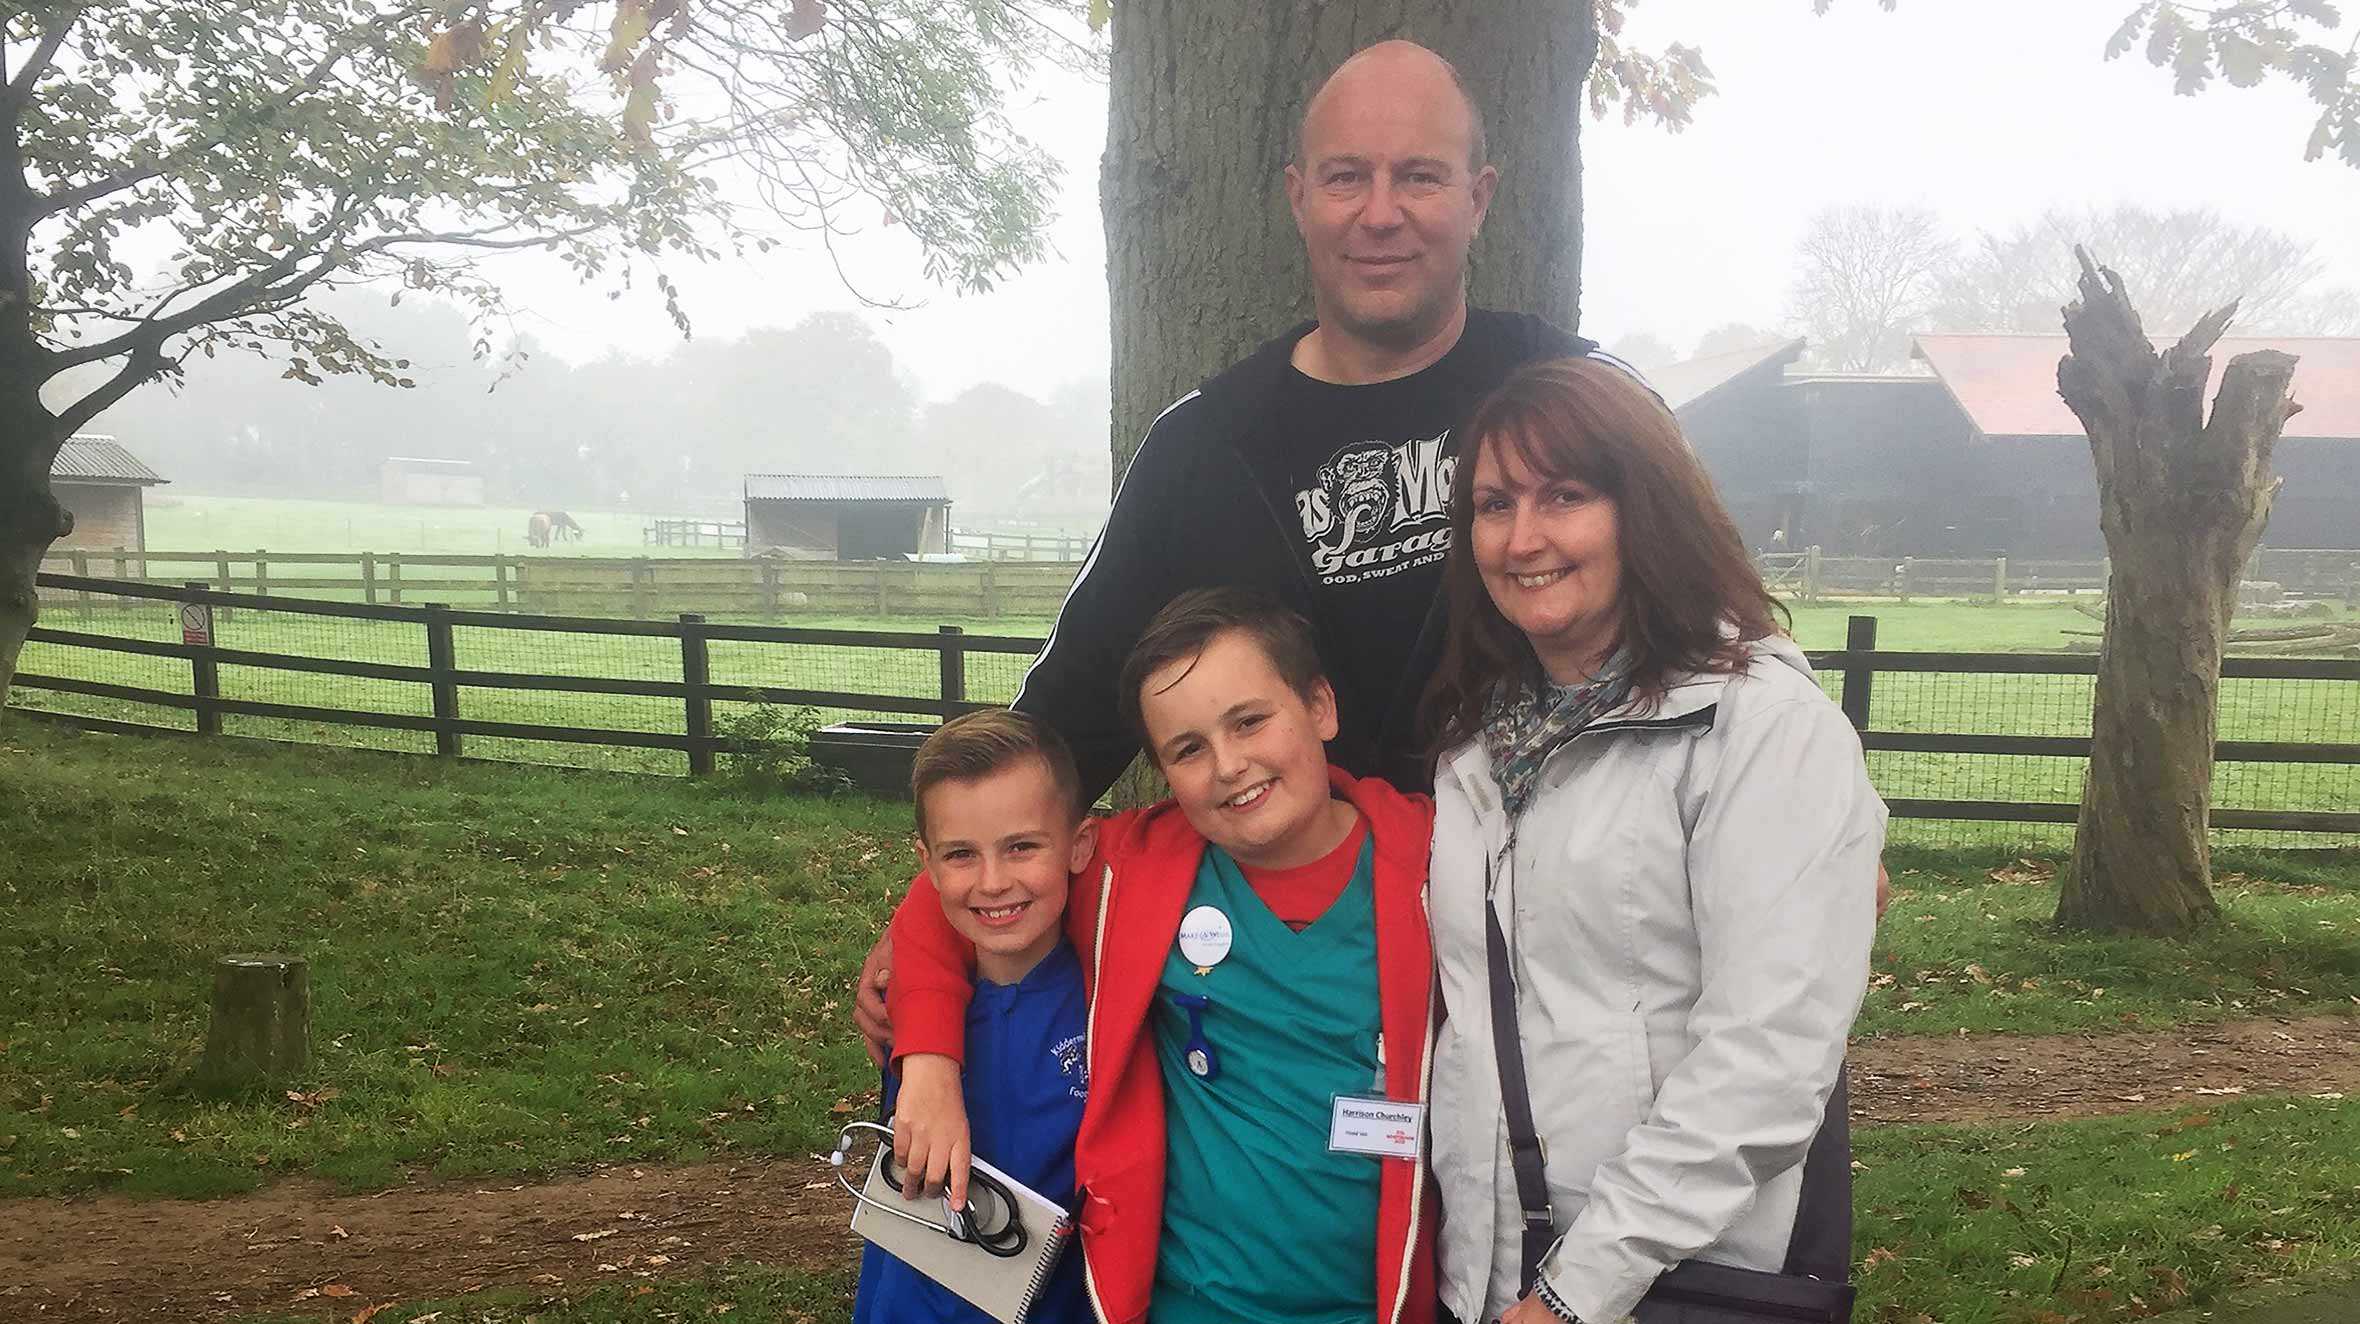 Harrison and his family posing in a glade of trees at Whipsnade Zoo during his wish.